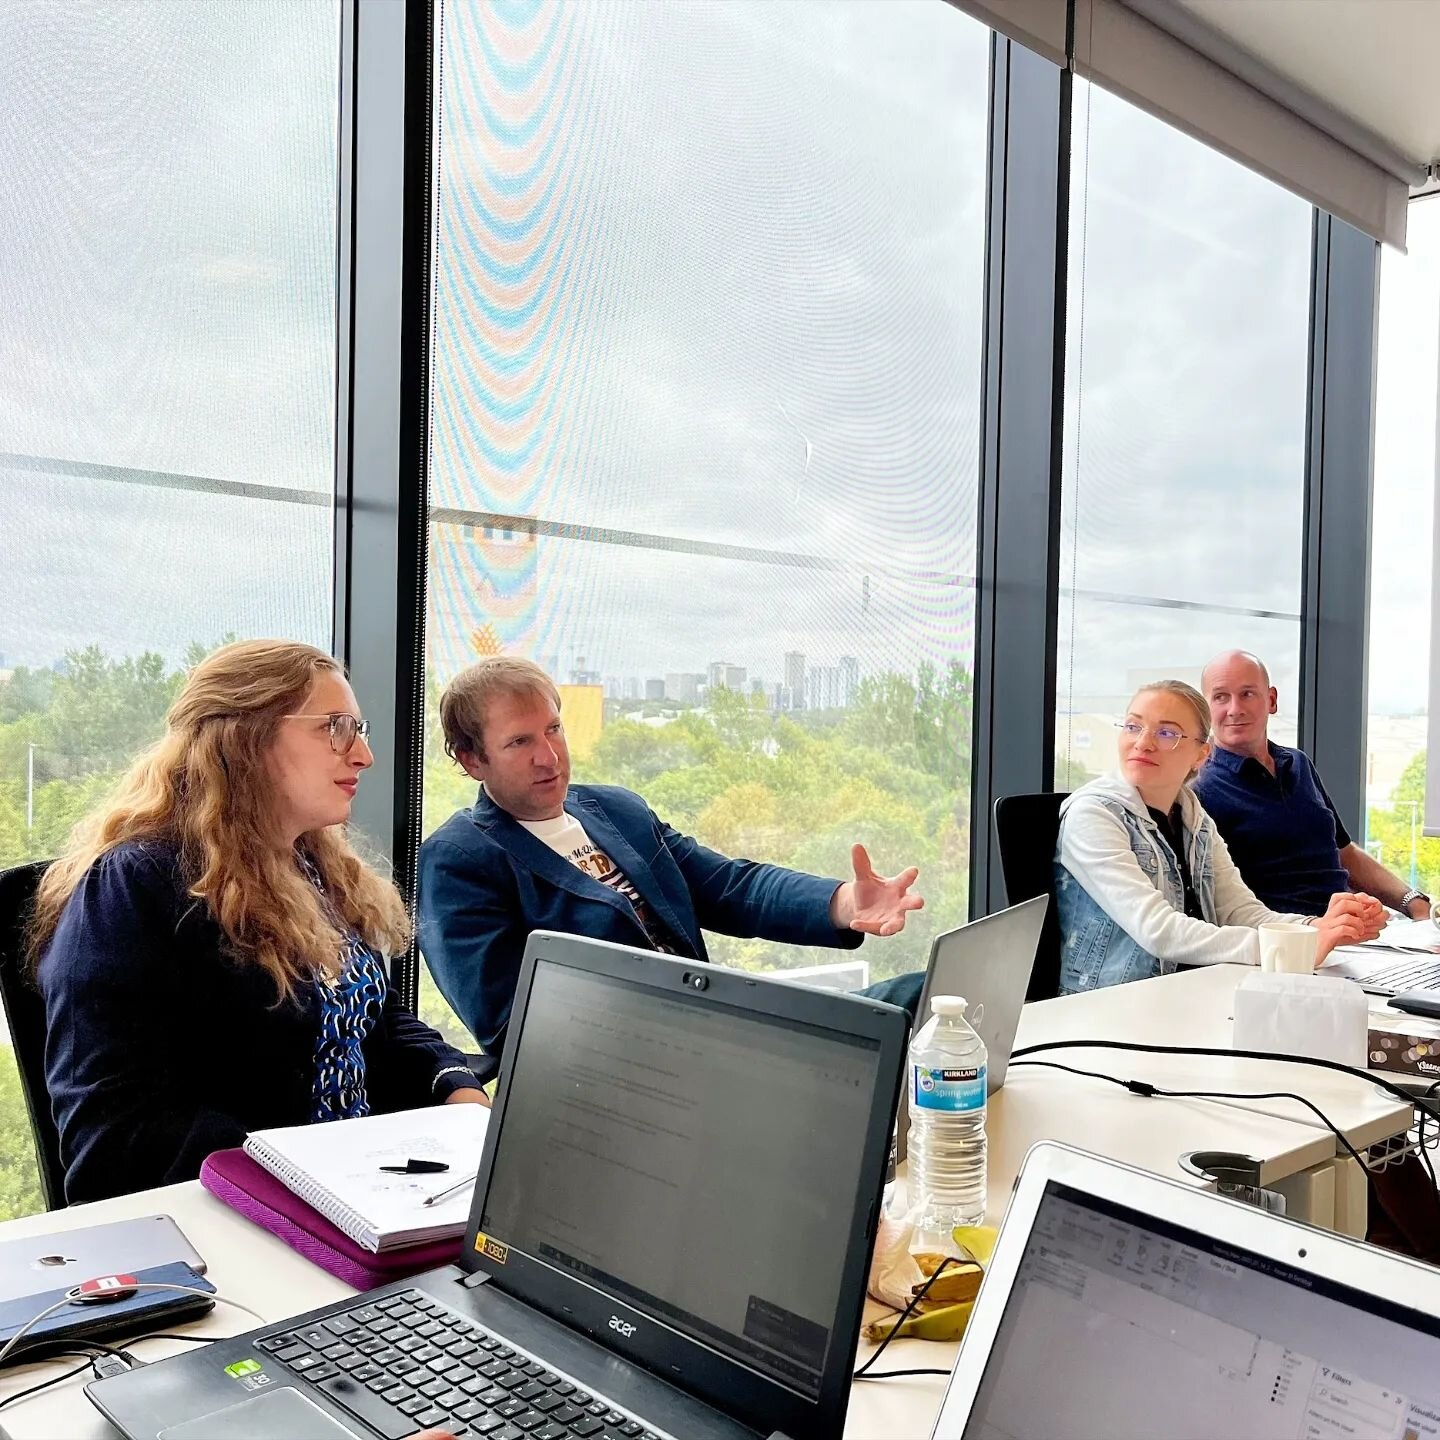 Working remotely might get challenging from time to time, that's why our management members didn't hesitate to take the opportunity and gather all in Manchester, to bond as a team while reviewing the highlights of H1 and planning the key objectives f